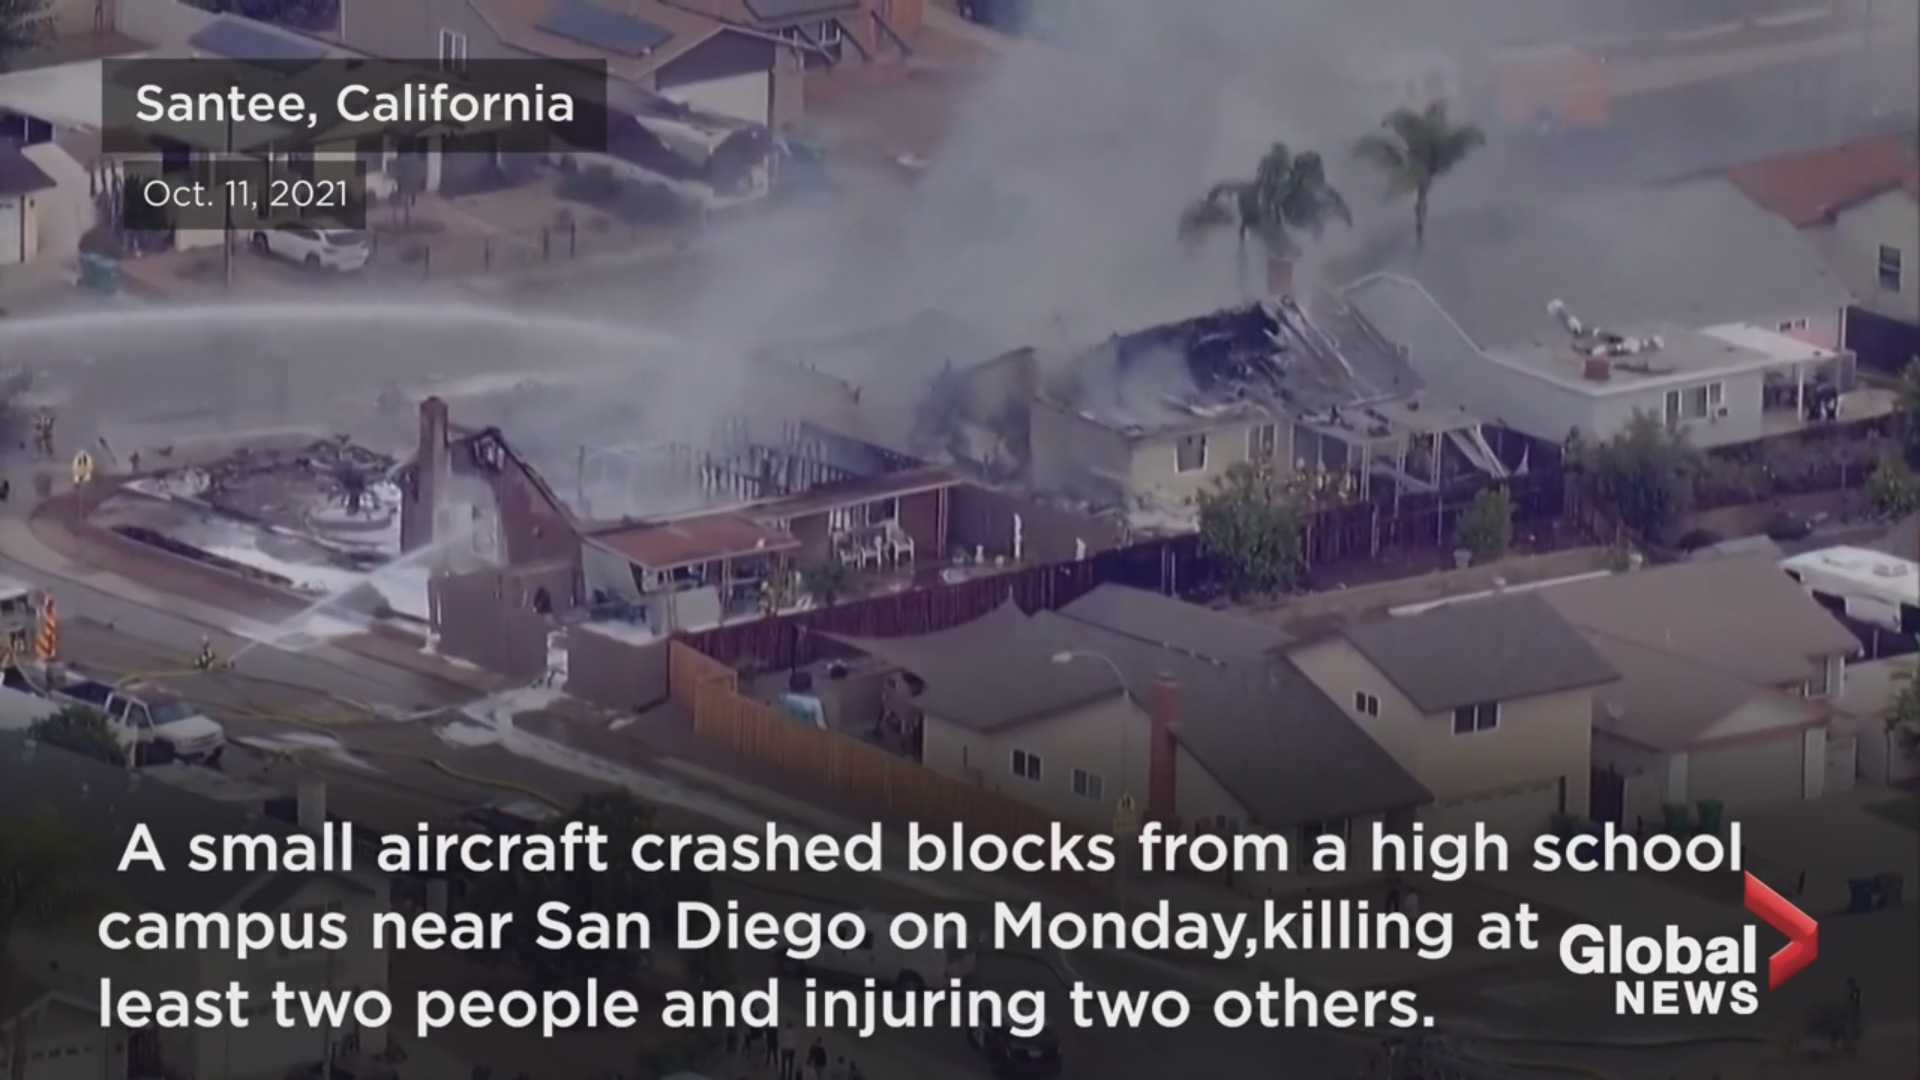 San Diego California Plane Crash Oct 11th at least 2 people have died and houses are on fire